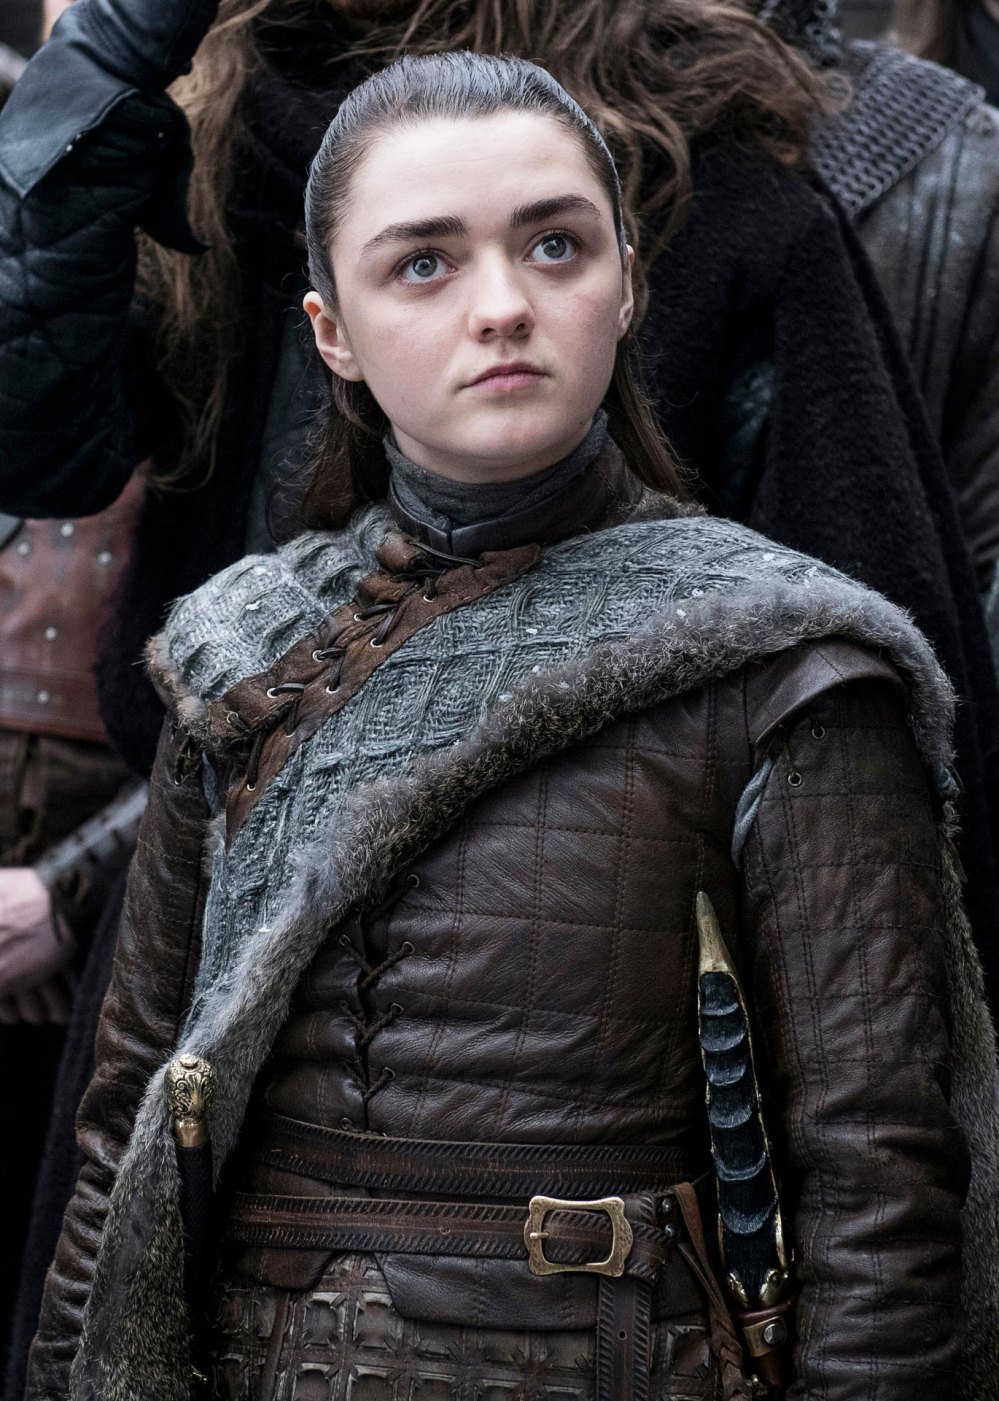 Maisie Williams Reflects on Game of Thrones Child Fame It Brought Me A Lot of Discomfort 615